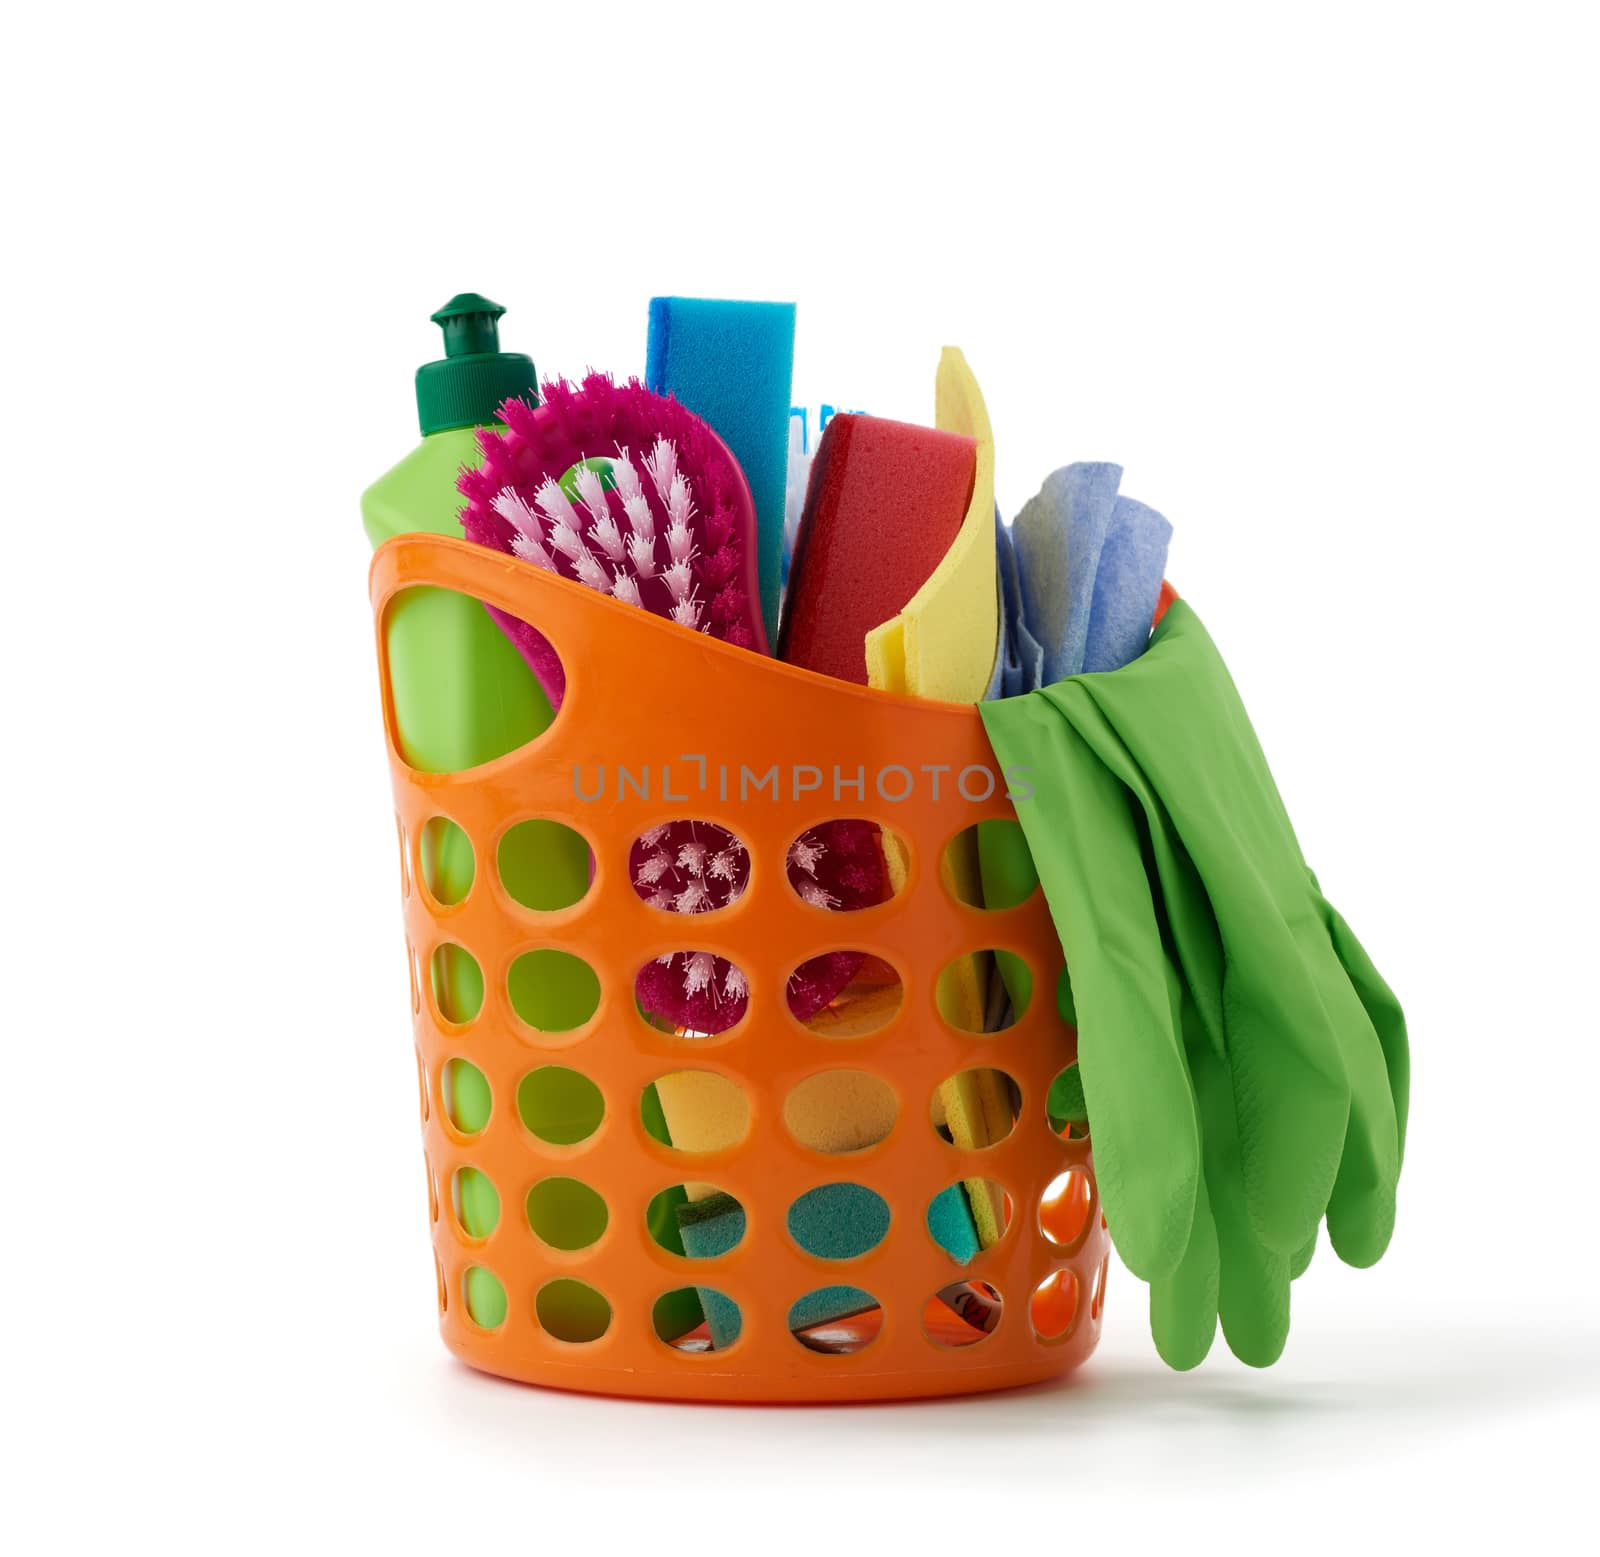 orange basket with washing sponges, rubber protective gloves, brushes and cleaning agent in a green plastic bottle, set isolated on a white background